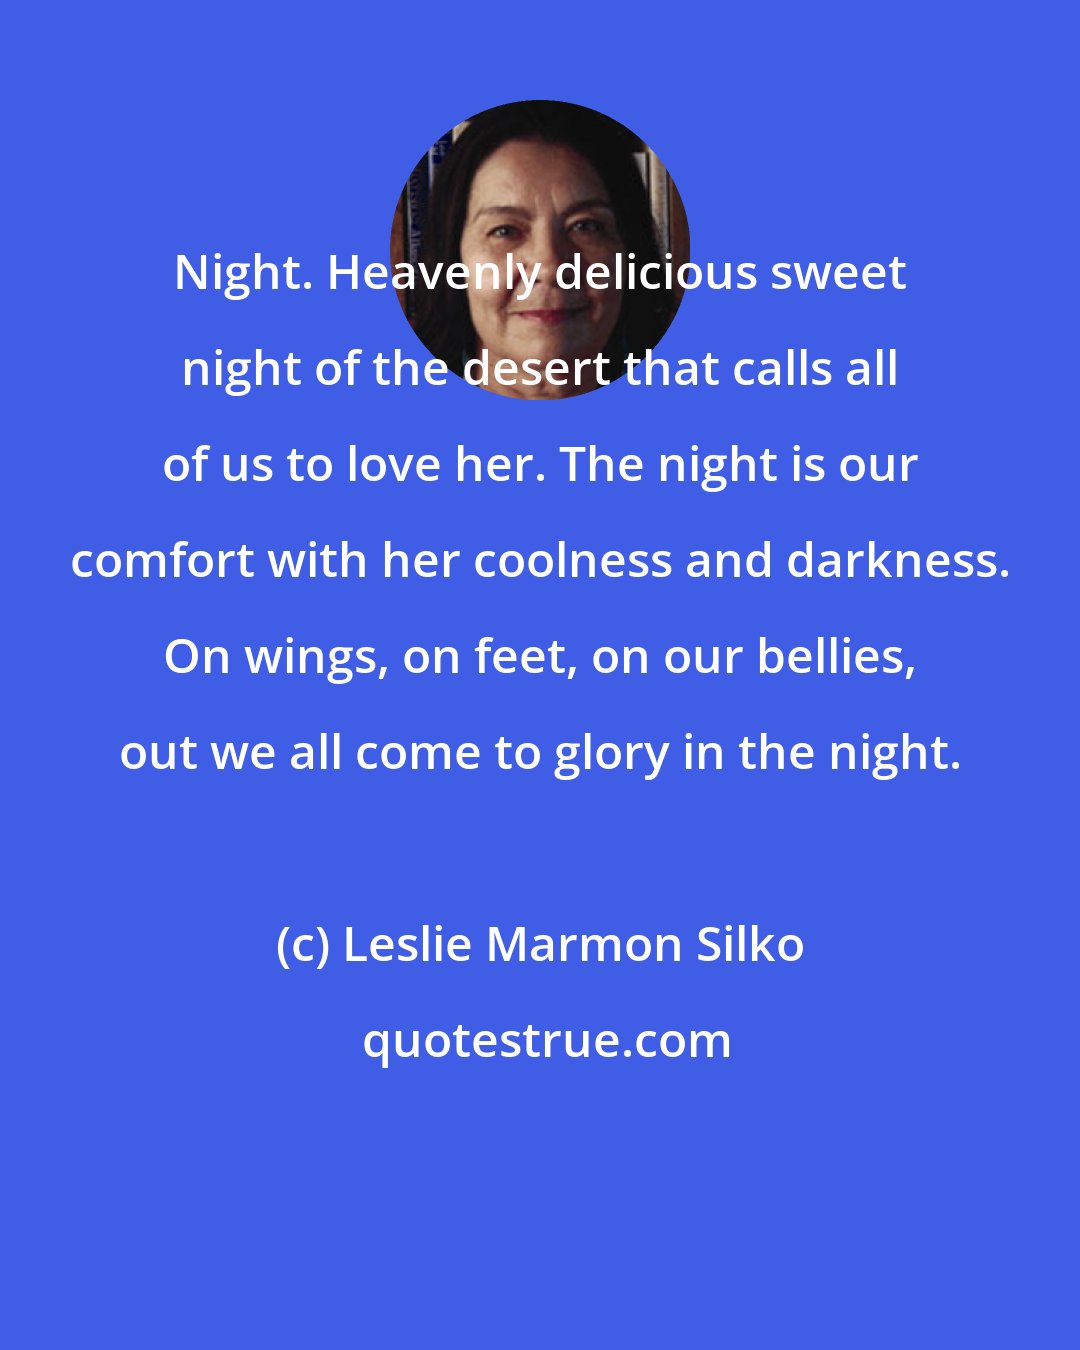 Leslie Marmon Silko: Night. Heavenly delicious sweet night of the desert that calls all of us to love her. The night is our comfort with her coolness and darkness. On wings, on feet, on our bellies, out we all come to glory in the night.